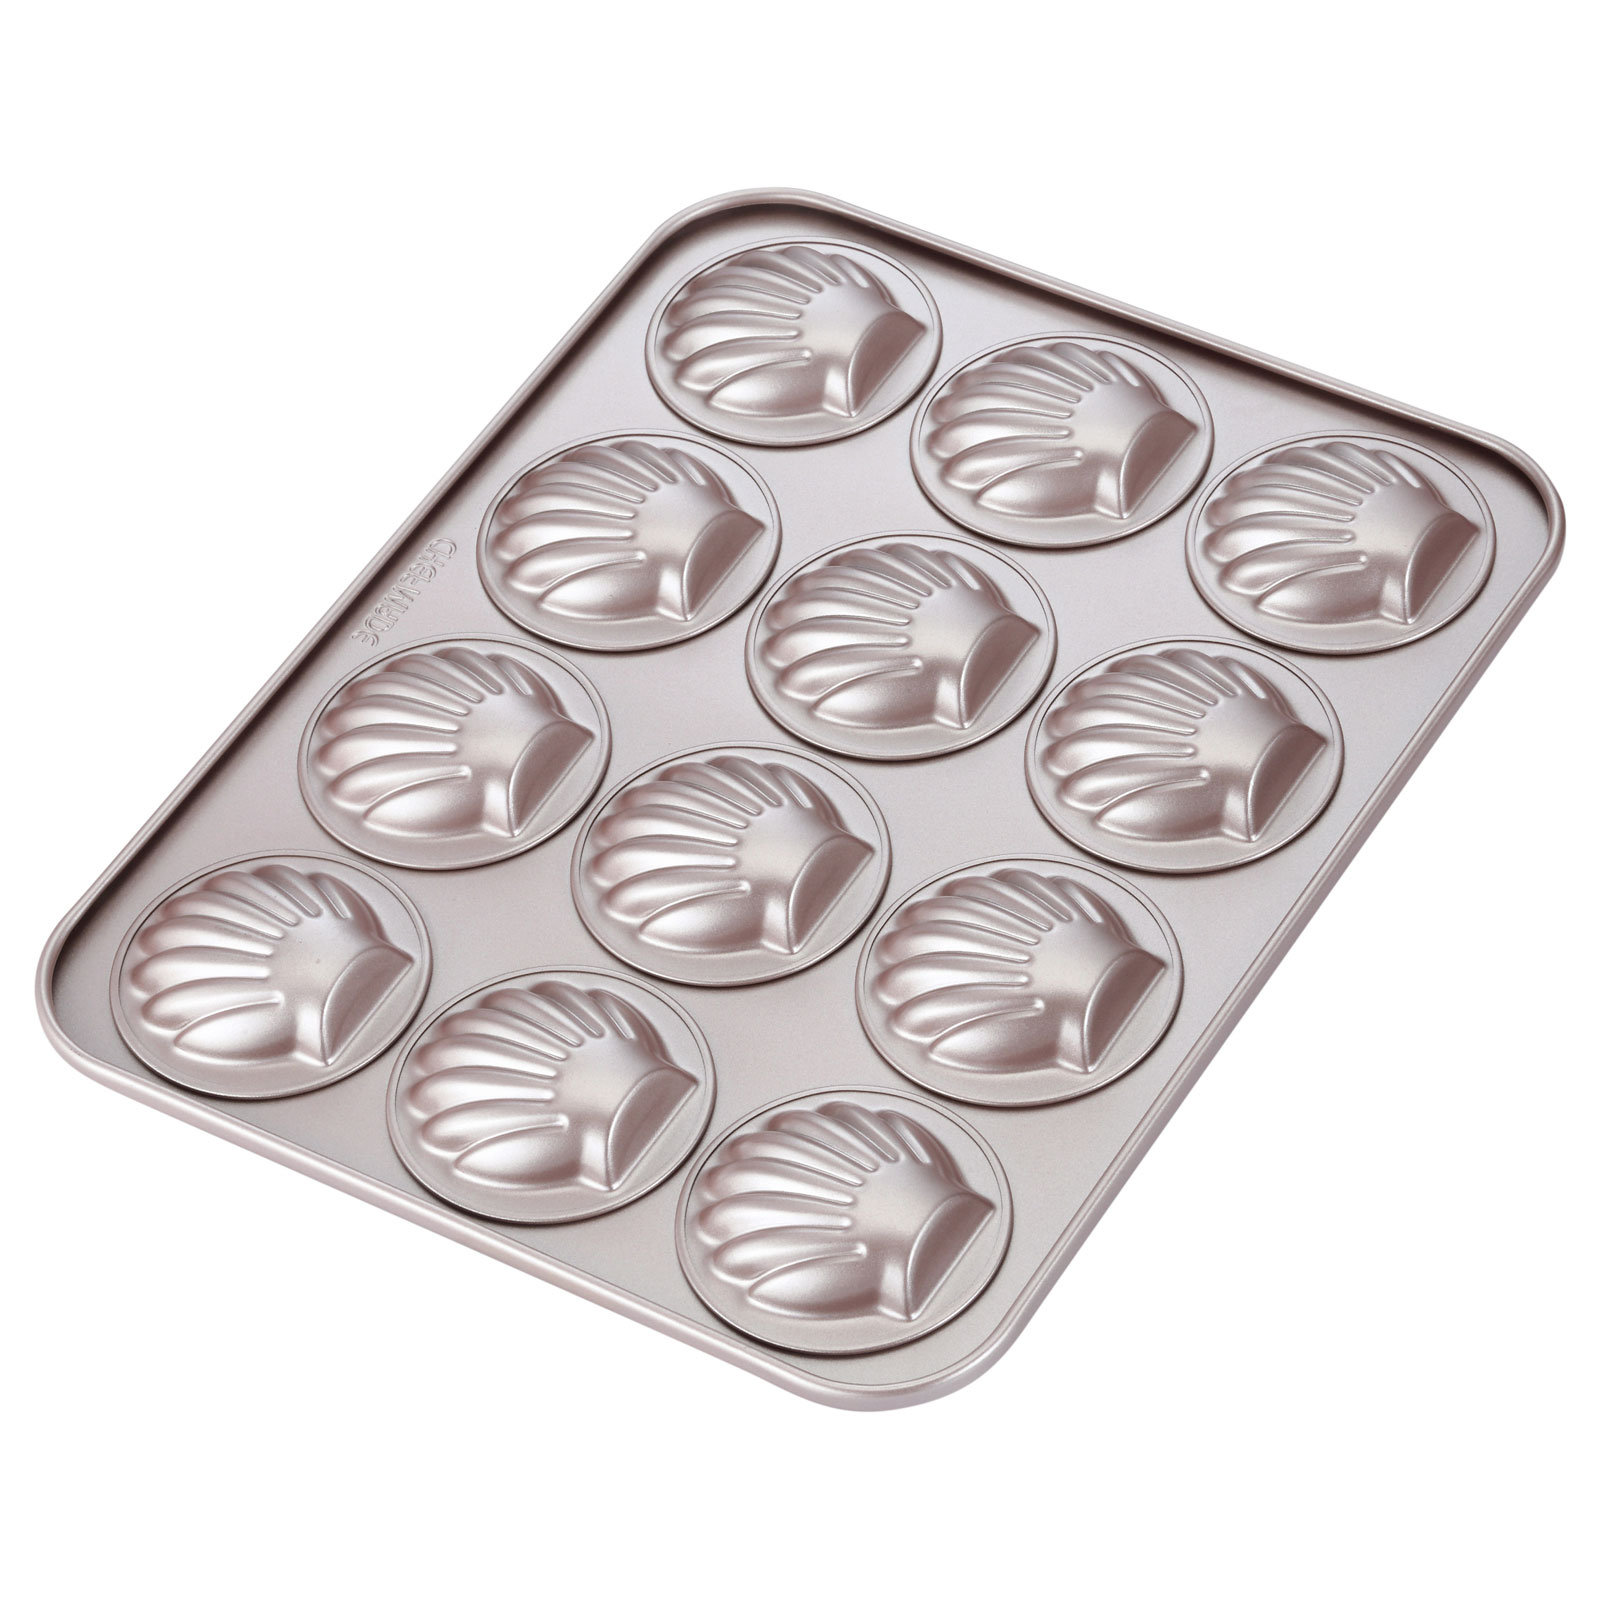 8 Round Cake Pan 2 Pcs - CHEFMADE official store